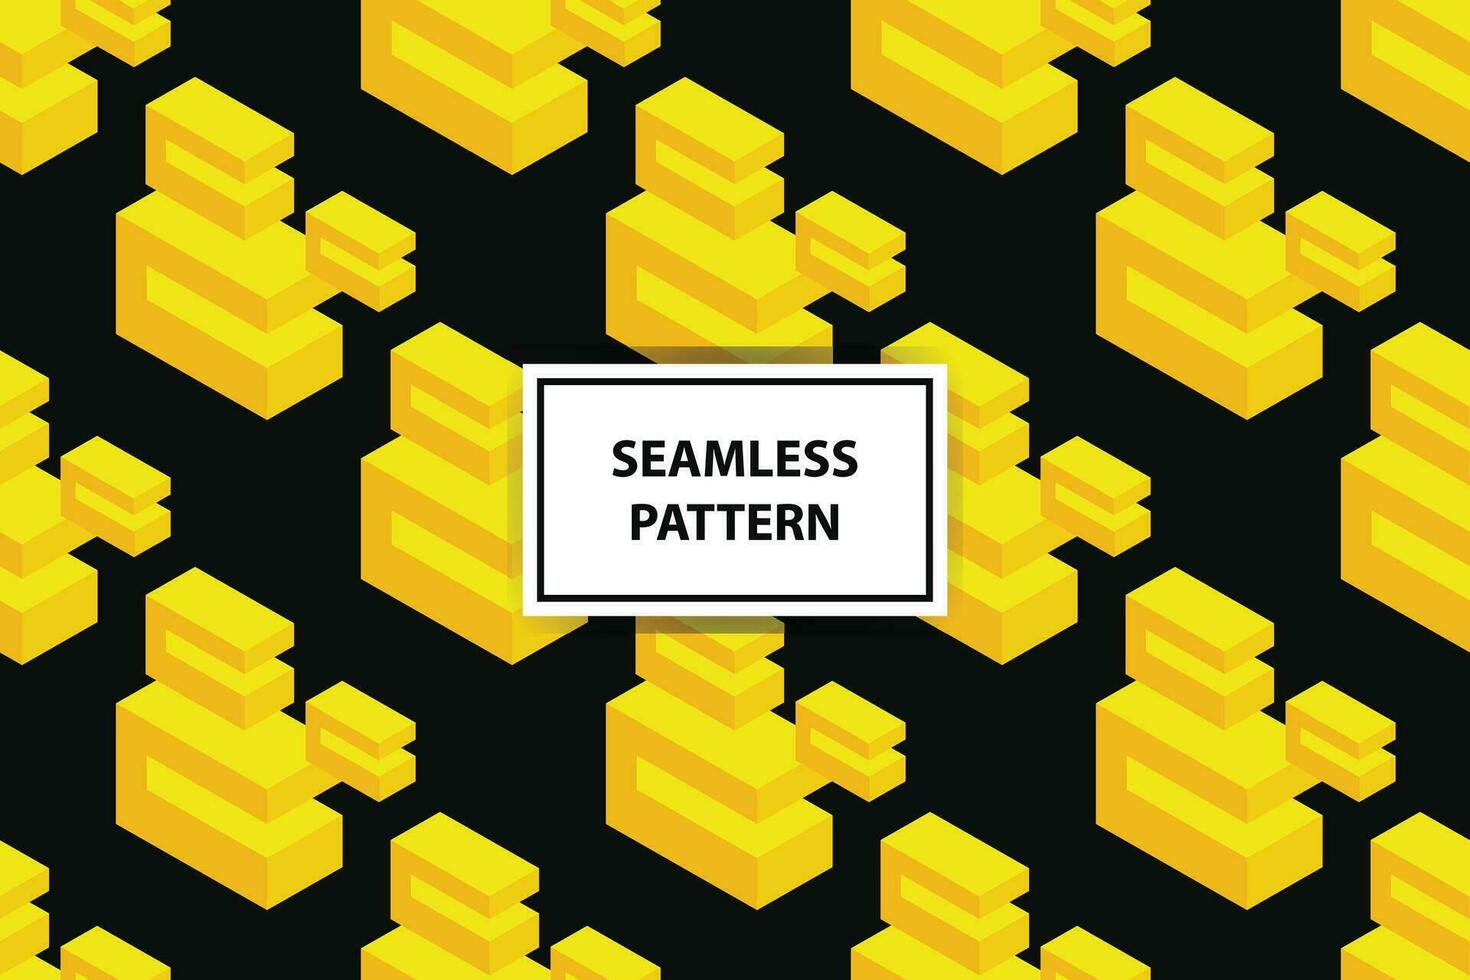 Abstract geometric seamless pattern. Isometric yellow shapes on black background. Creative design. Vector illustration.